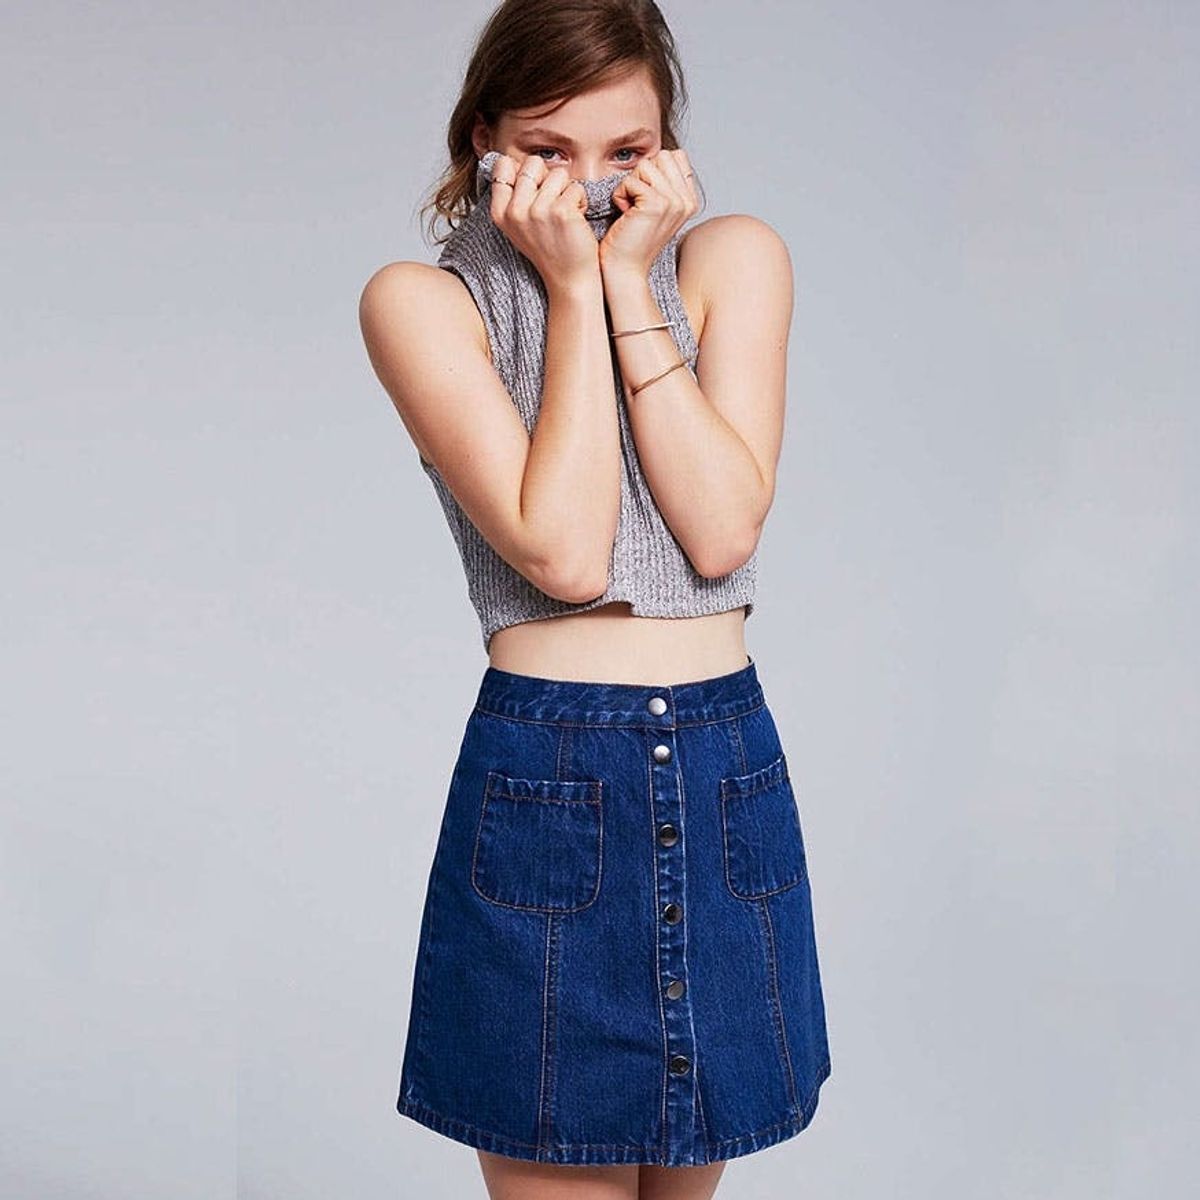 10 Denim Skirts to Wear Today That Will Take You Back to the ’90s